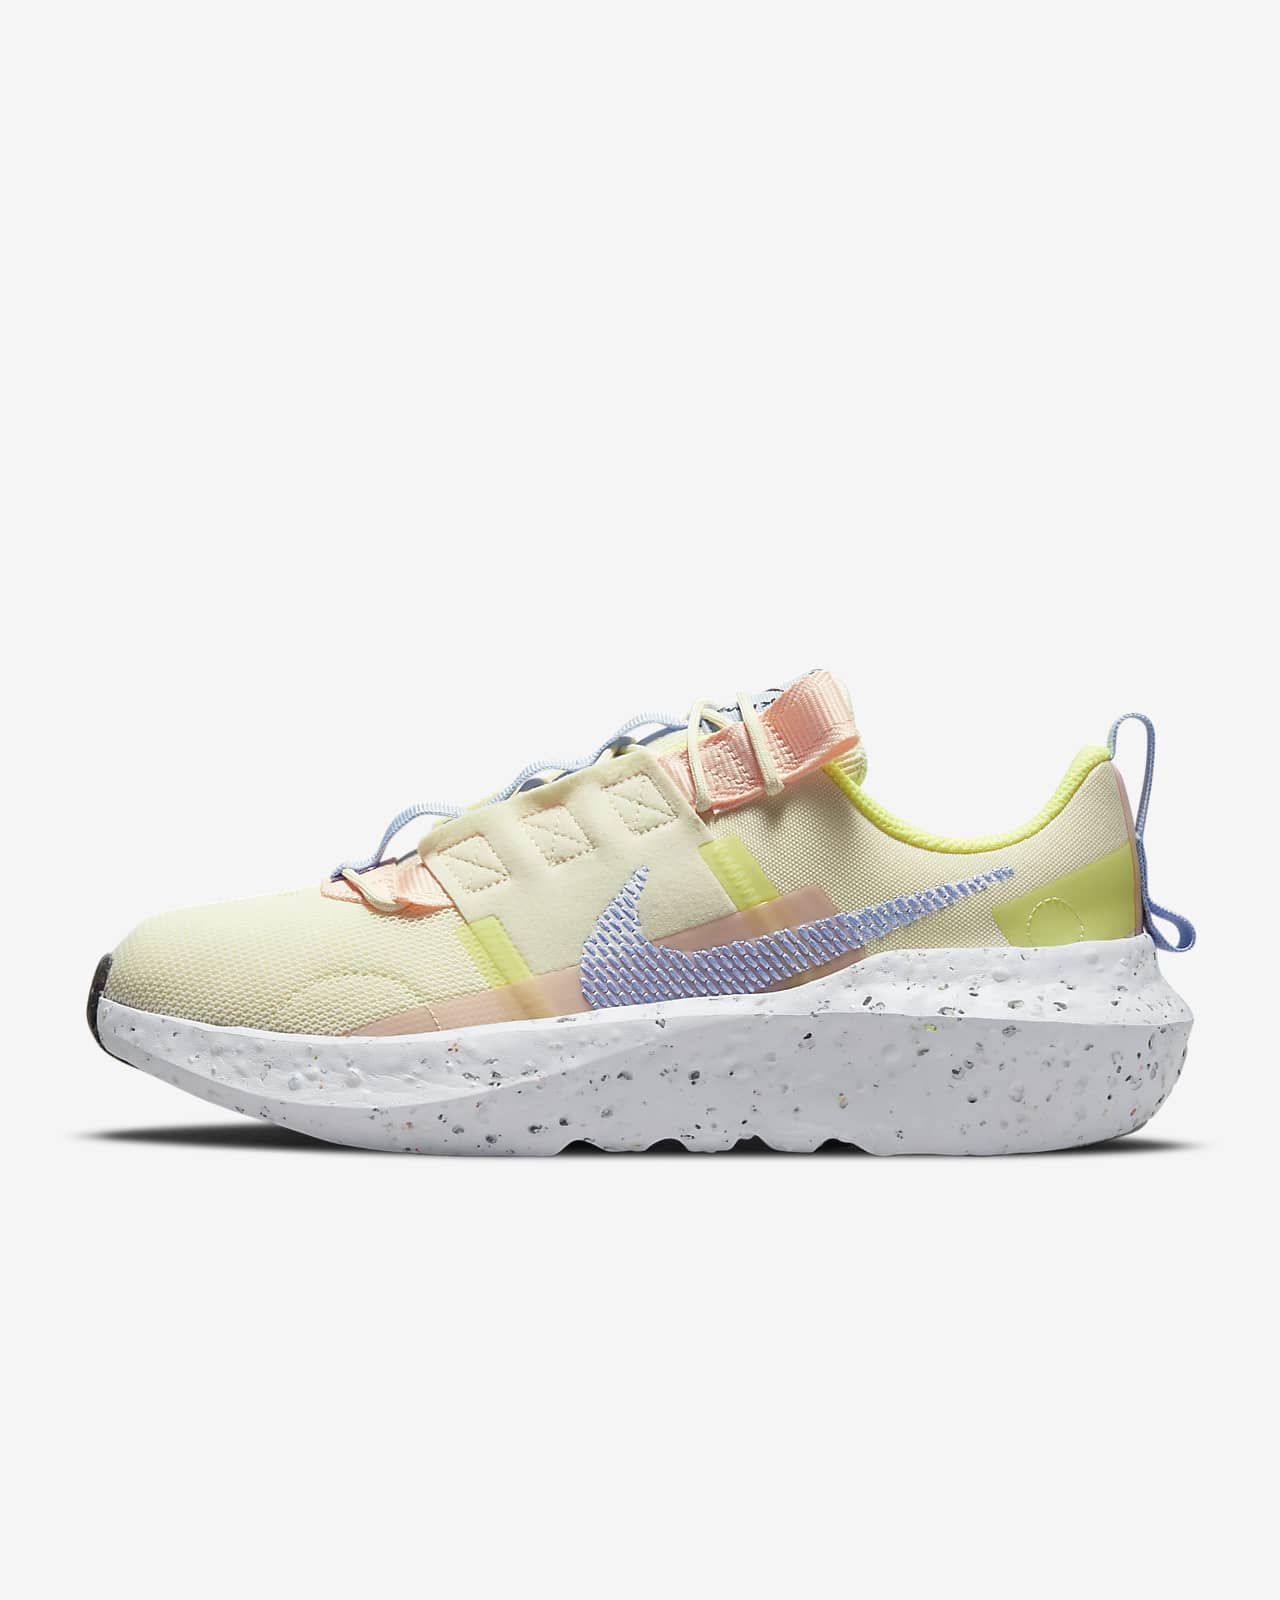 Nike Crater ImpactWomen's Shoes$63.97$10036% off | Nike (US)